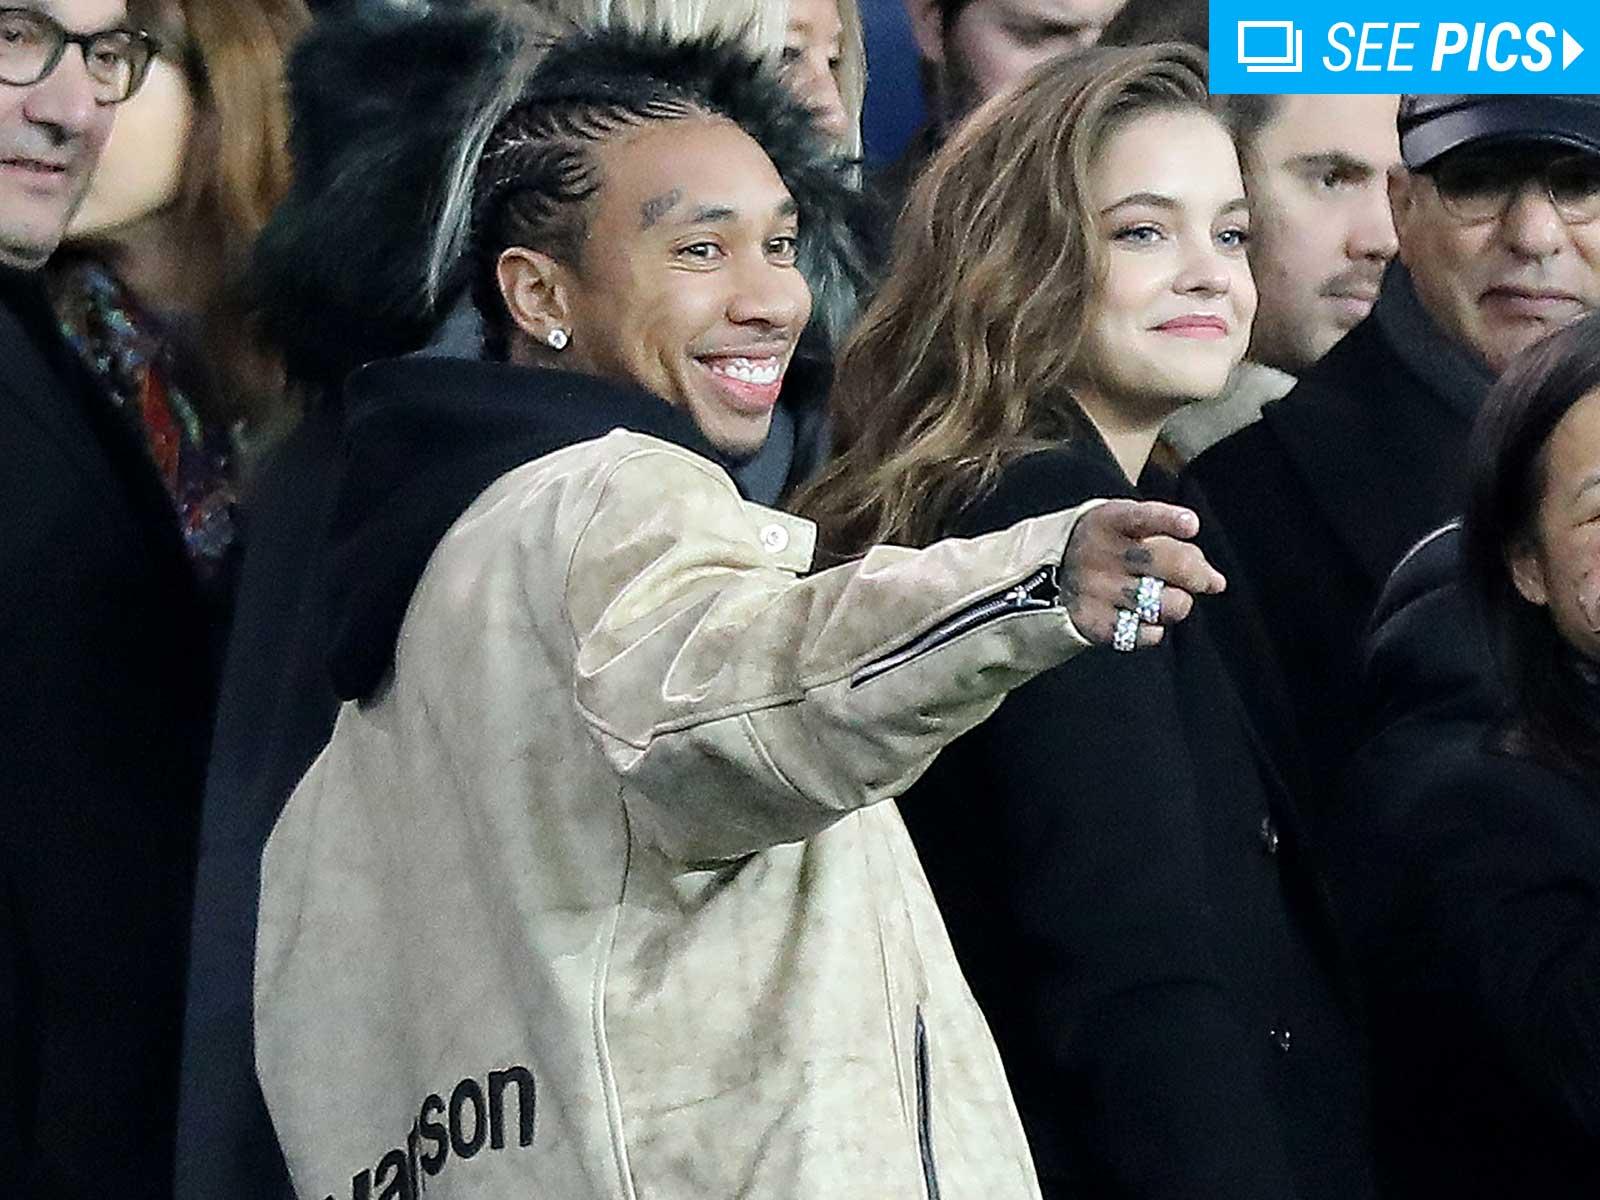 Tyga Finds Soccer Much More Enjoyable When with a Model